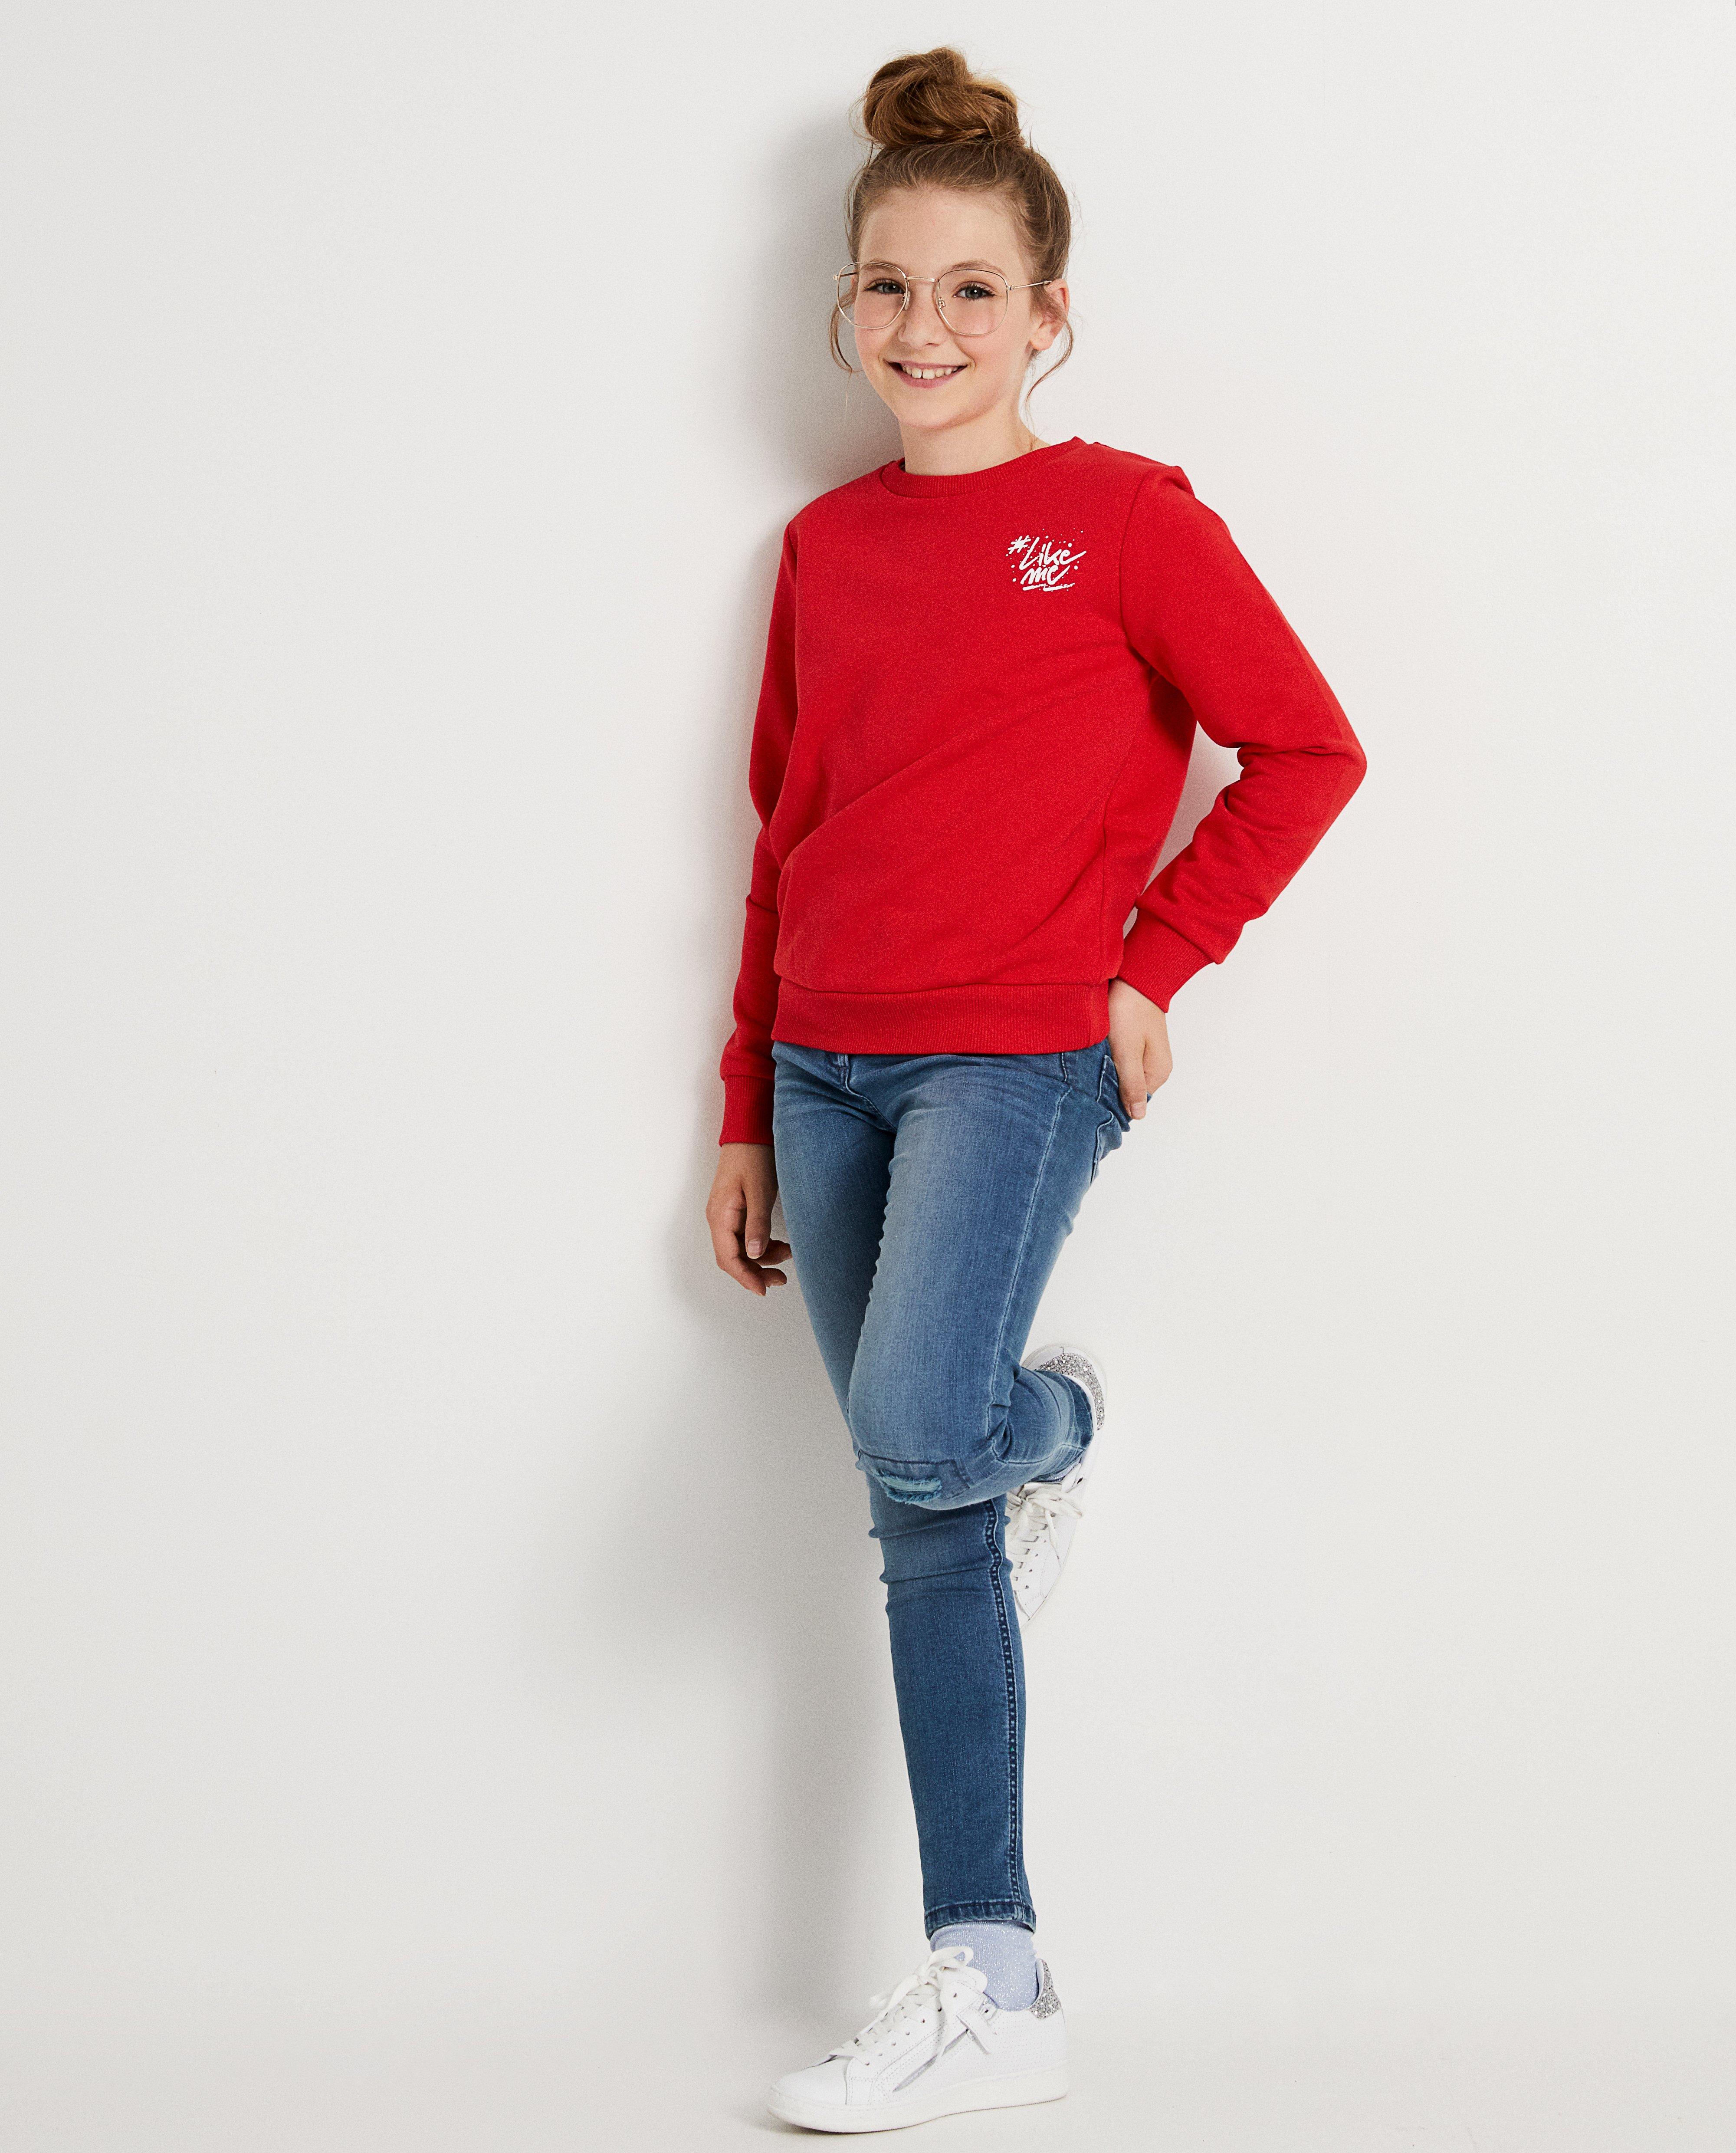 Rode sweater met opschrift #LikeMe - in wit - Like Me